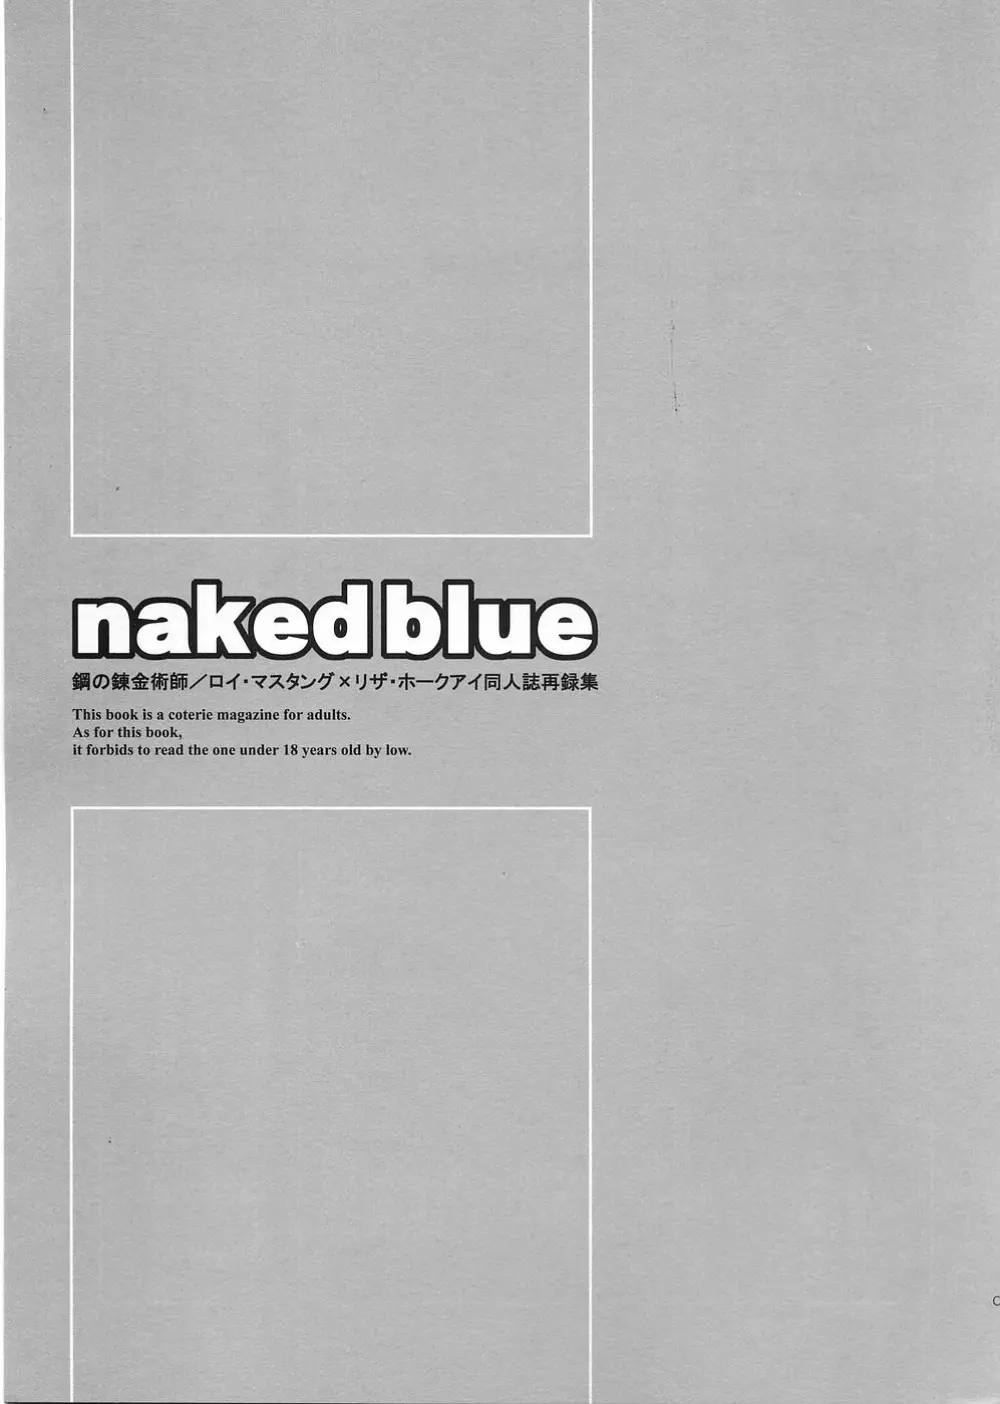 naked blue. 5ページ